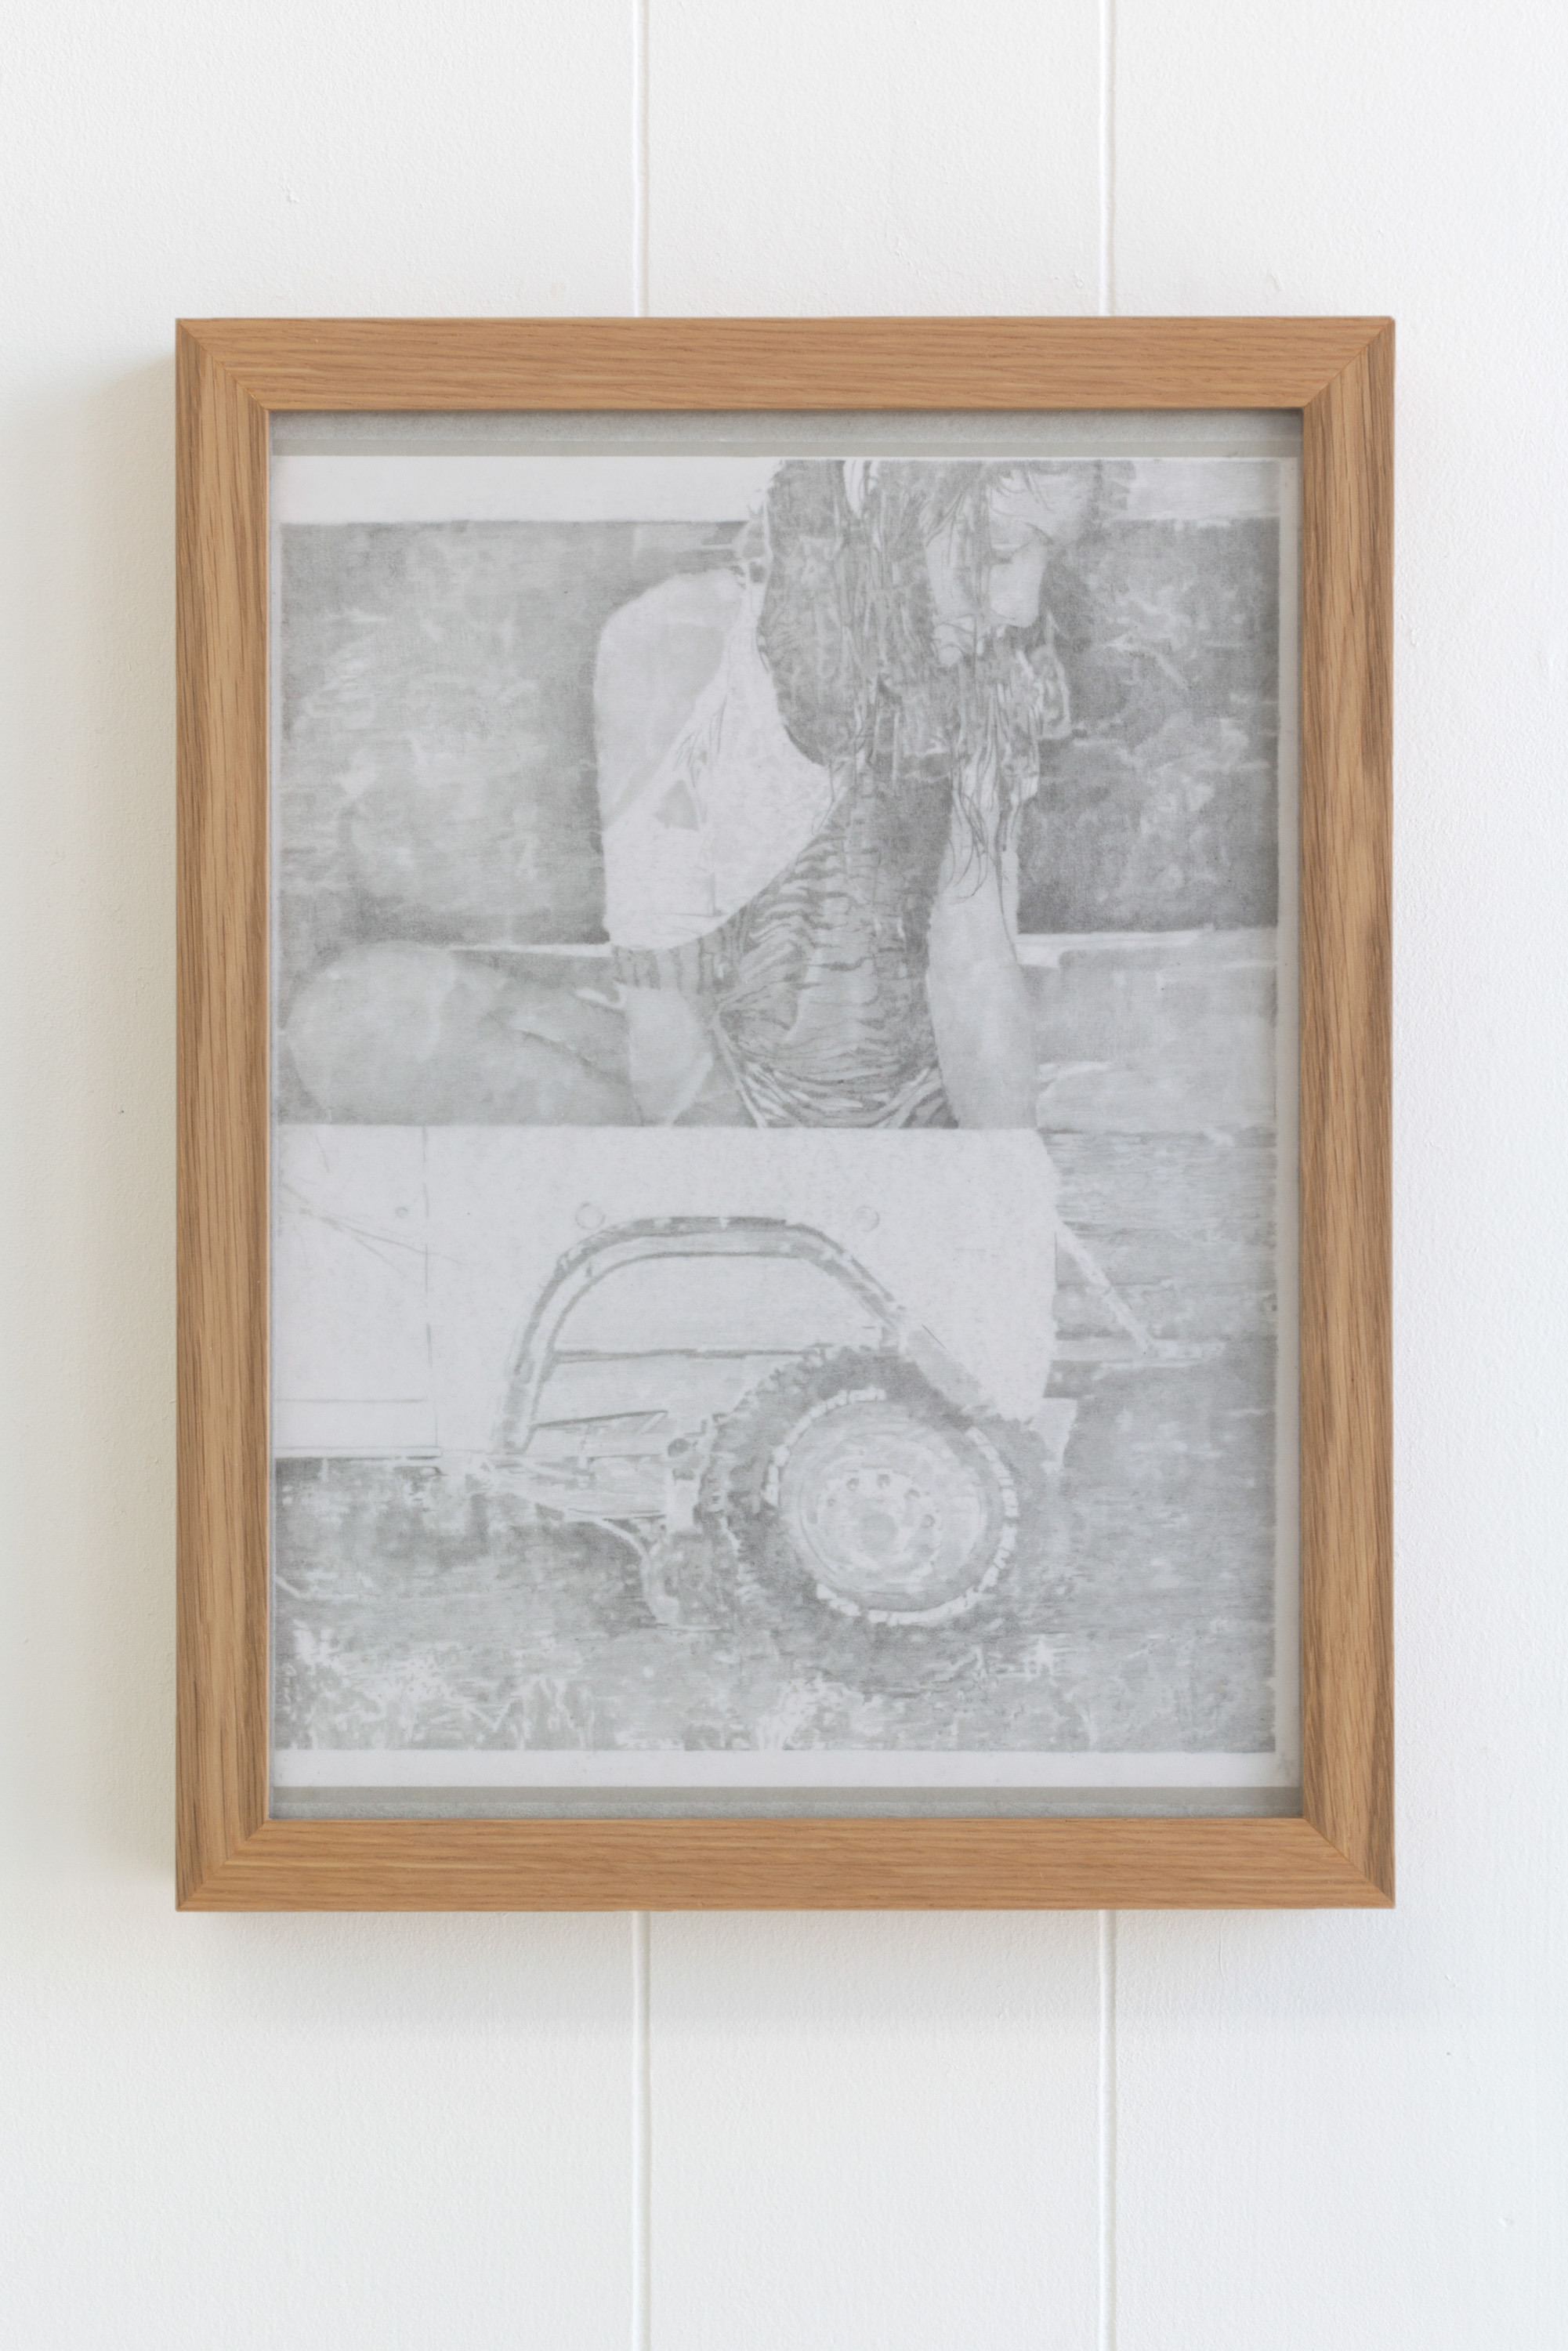 Jamieson Pearl, And now the road smells like a flock drowned in diesel fuel, 2022, Graphite on tracing paper on printer paper on drawing paper, white oak frame, 9 x 12 in (10.5 x 13.5 x 1.5 in framed)